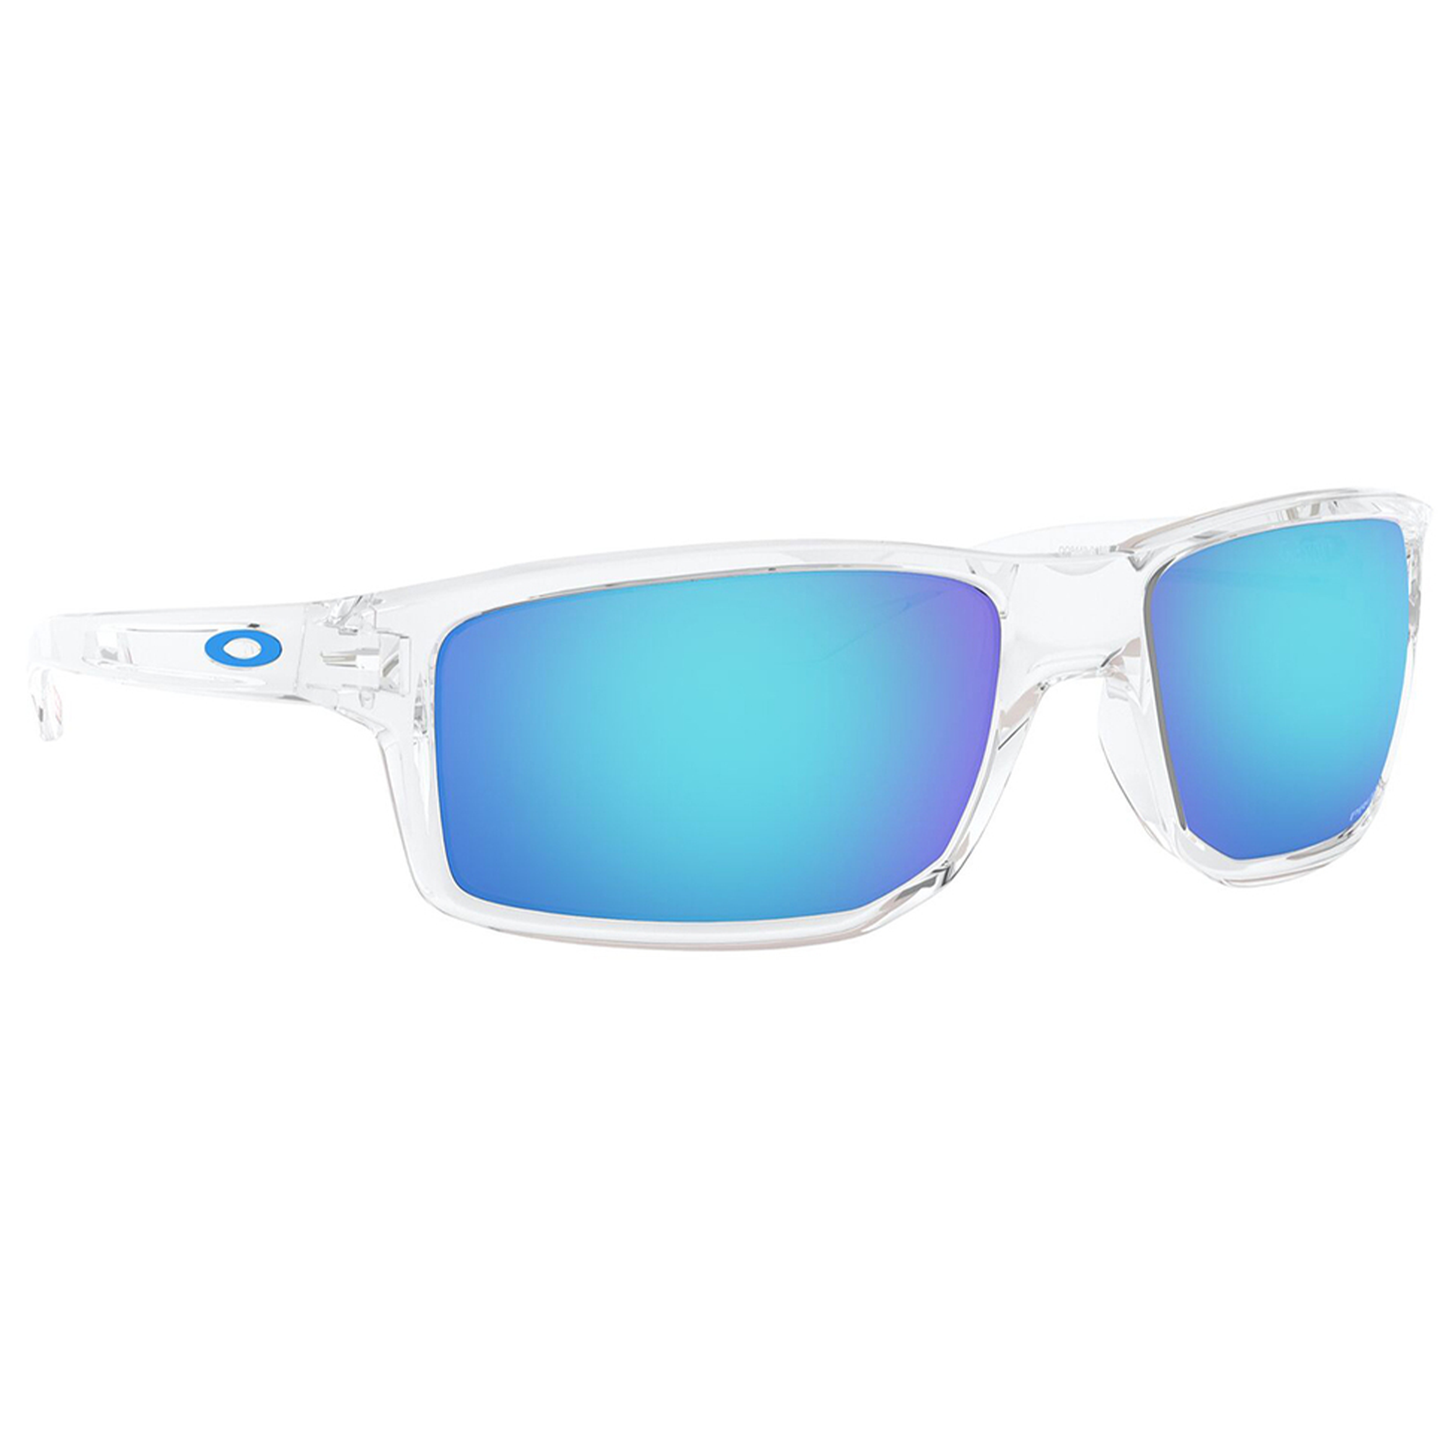 Oakley Gibston Sunglasses (Polished Clear) Prizm Sapphire Lens - Free Case